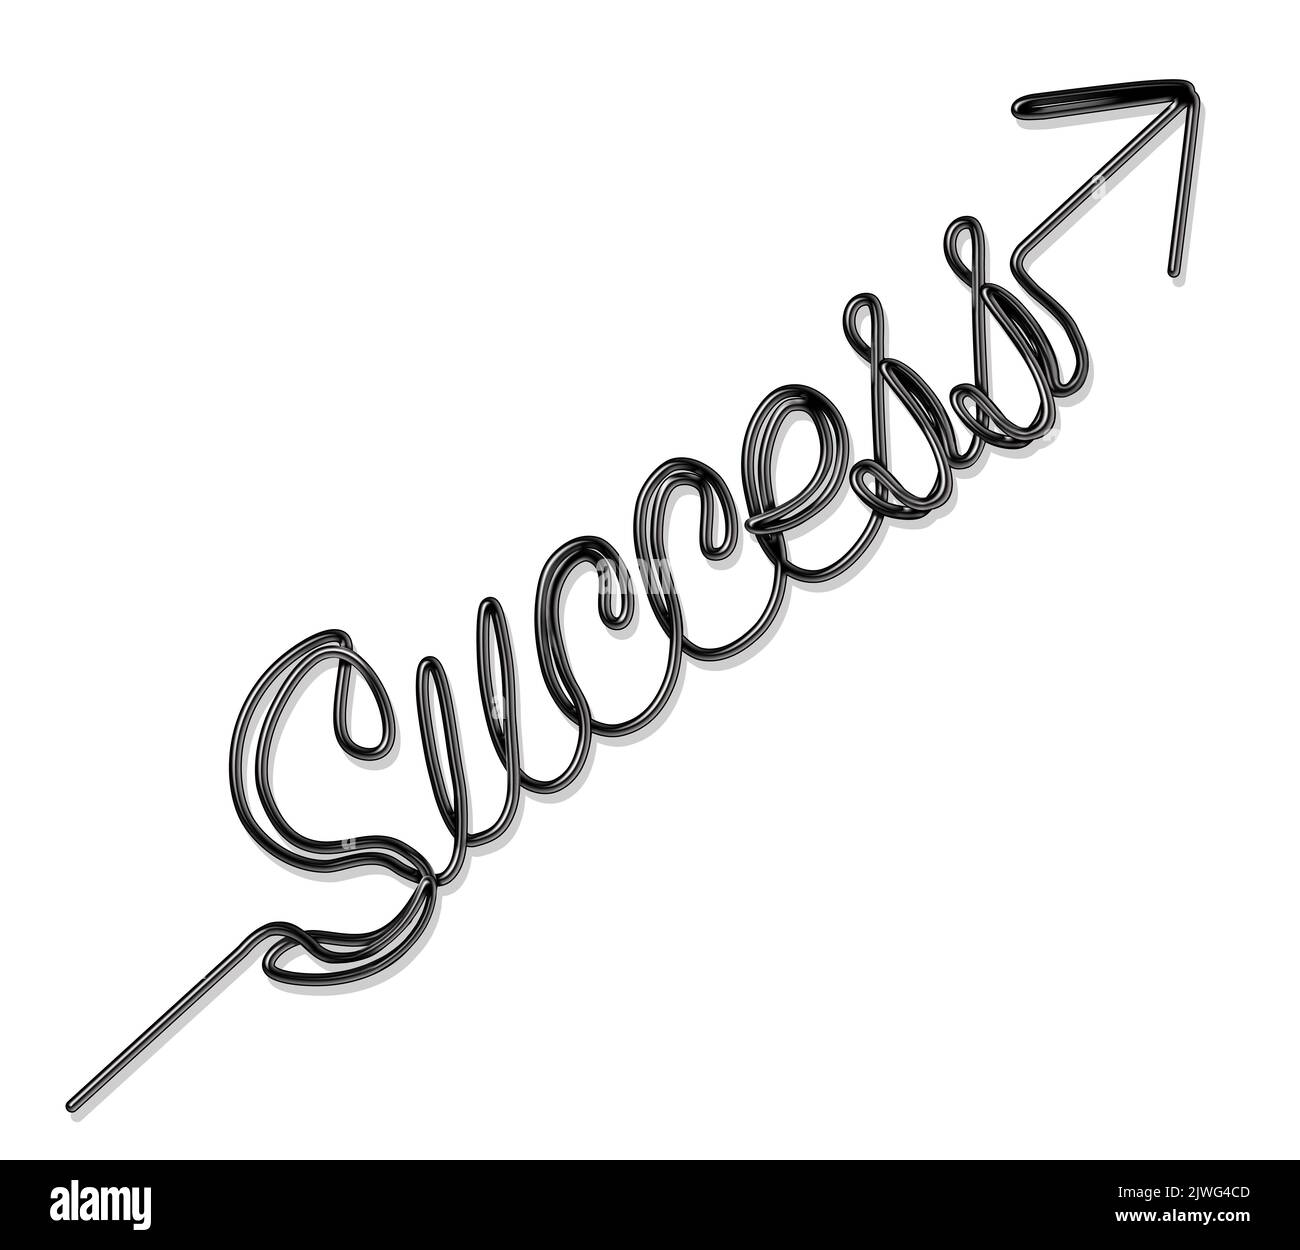 Success metaphor and to succeed in business and be a winner in life concept as a string or rope shaped as text and an arrow. Stock Photo